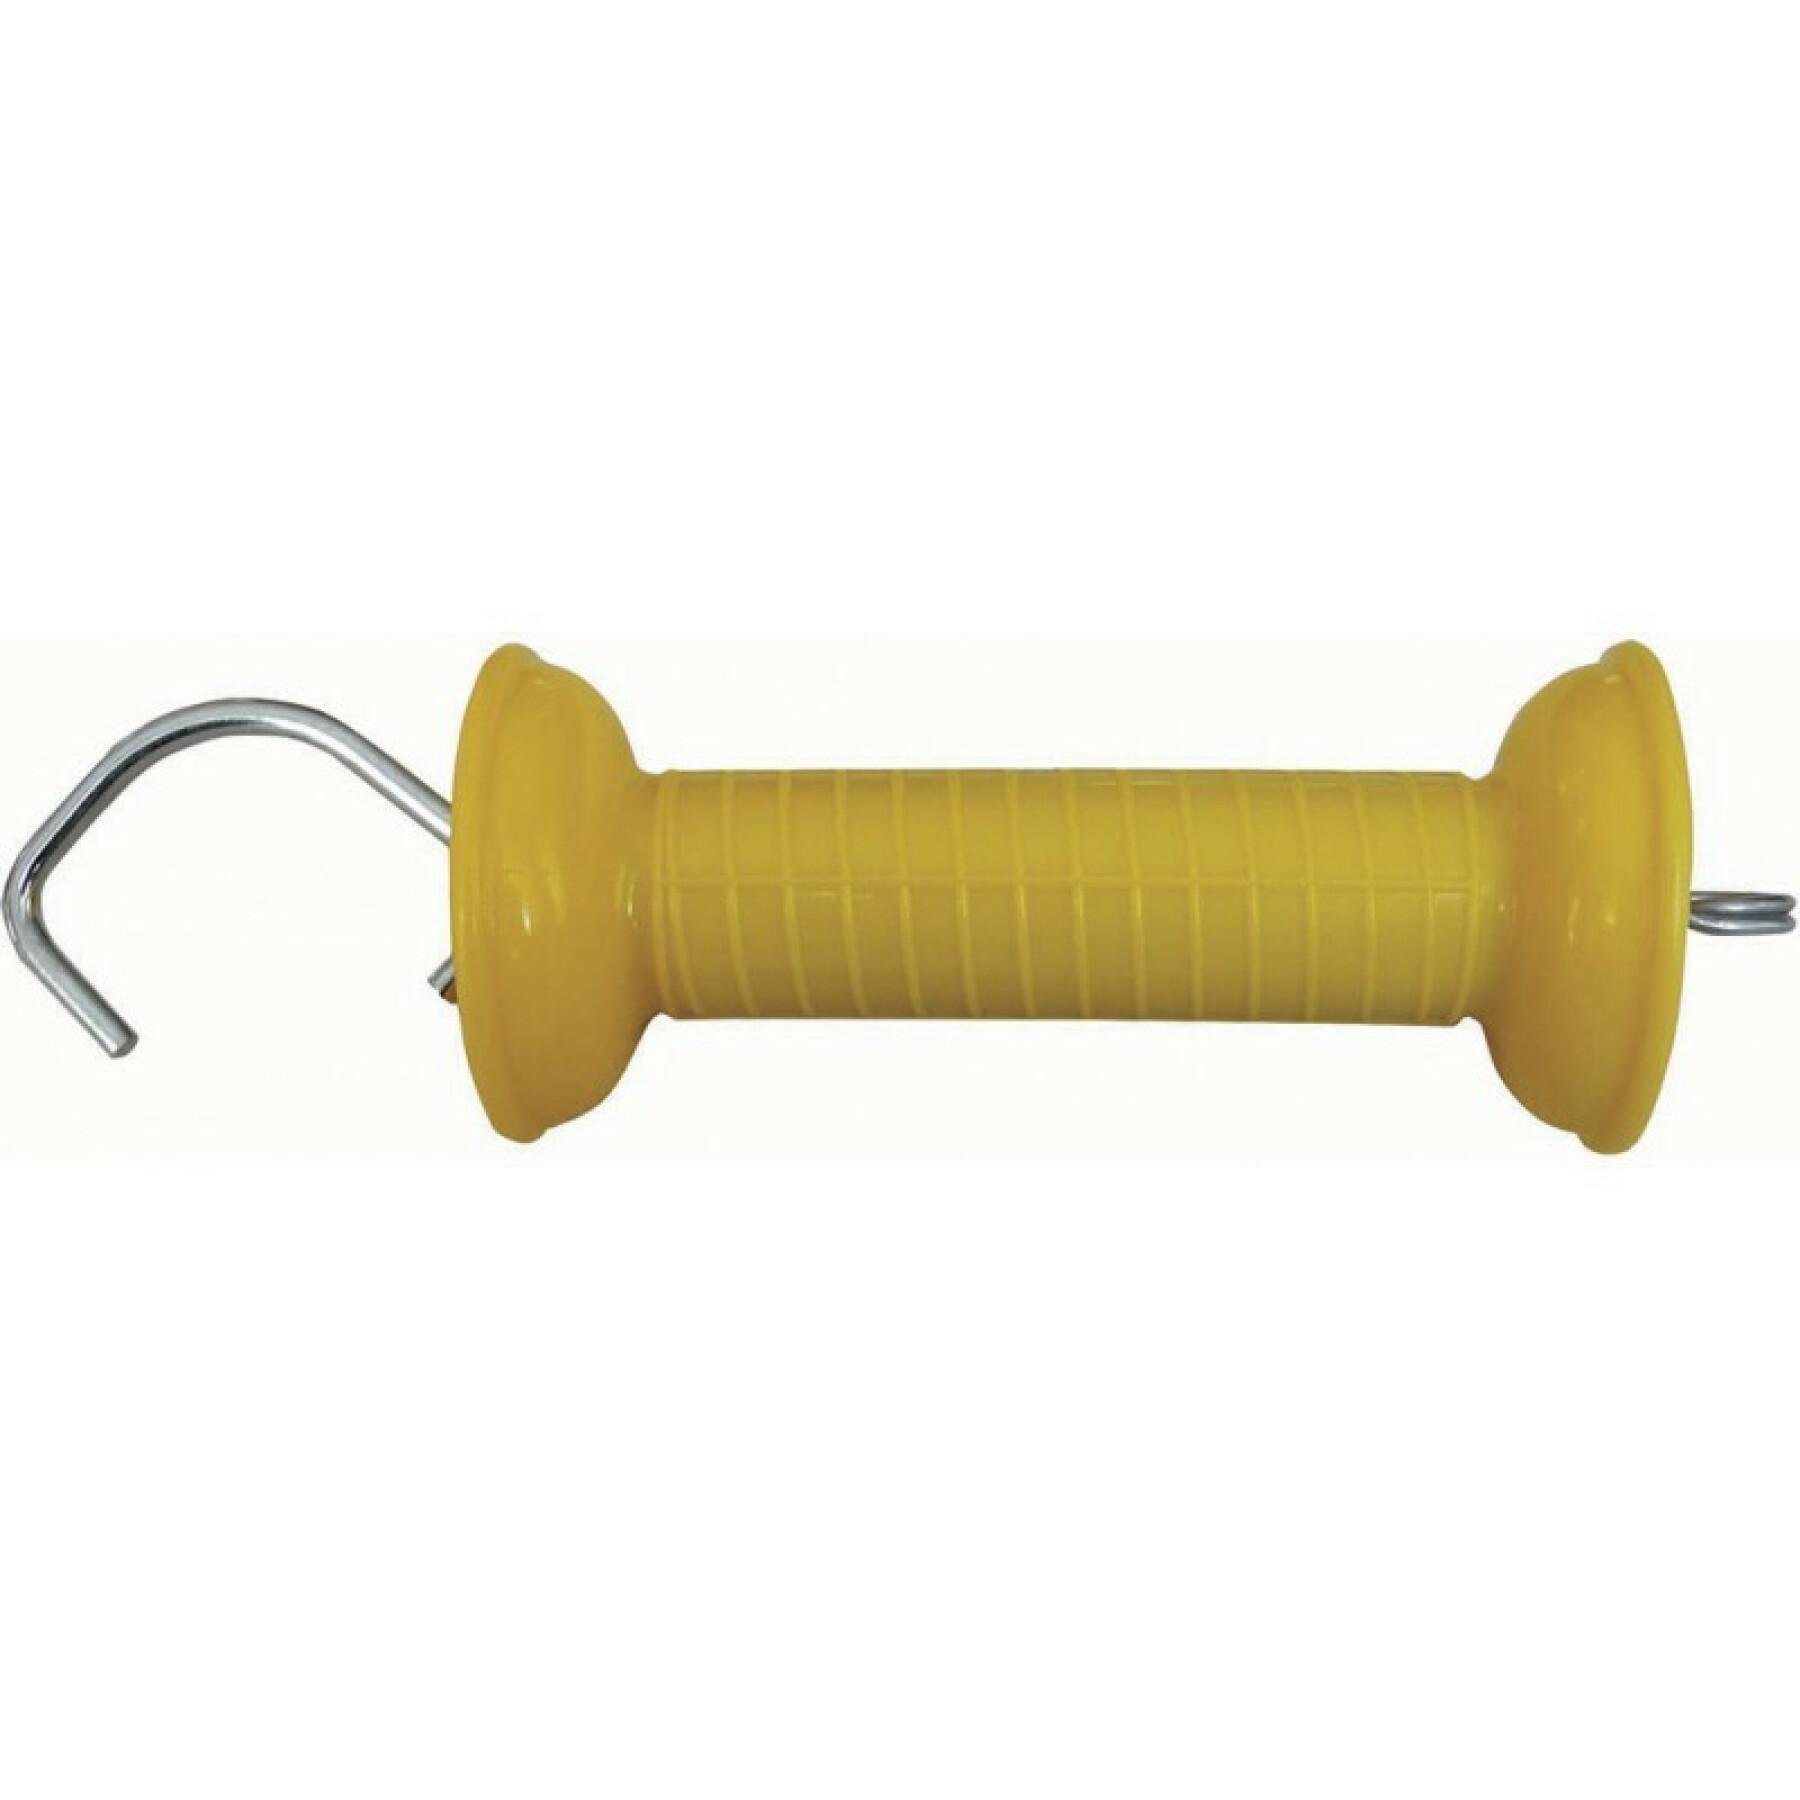 Spring loaded insulating handle Beaumont